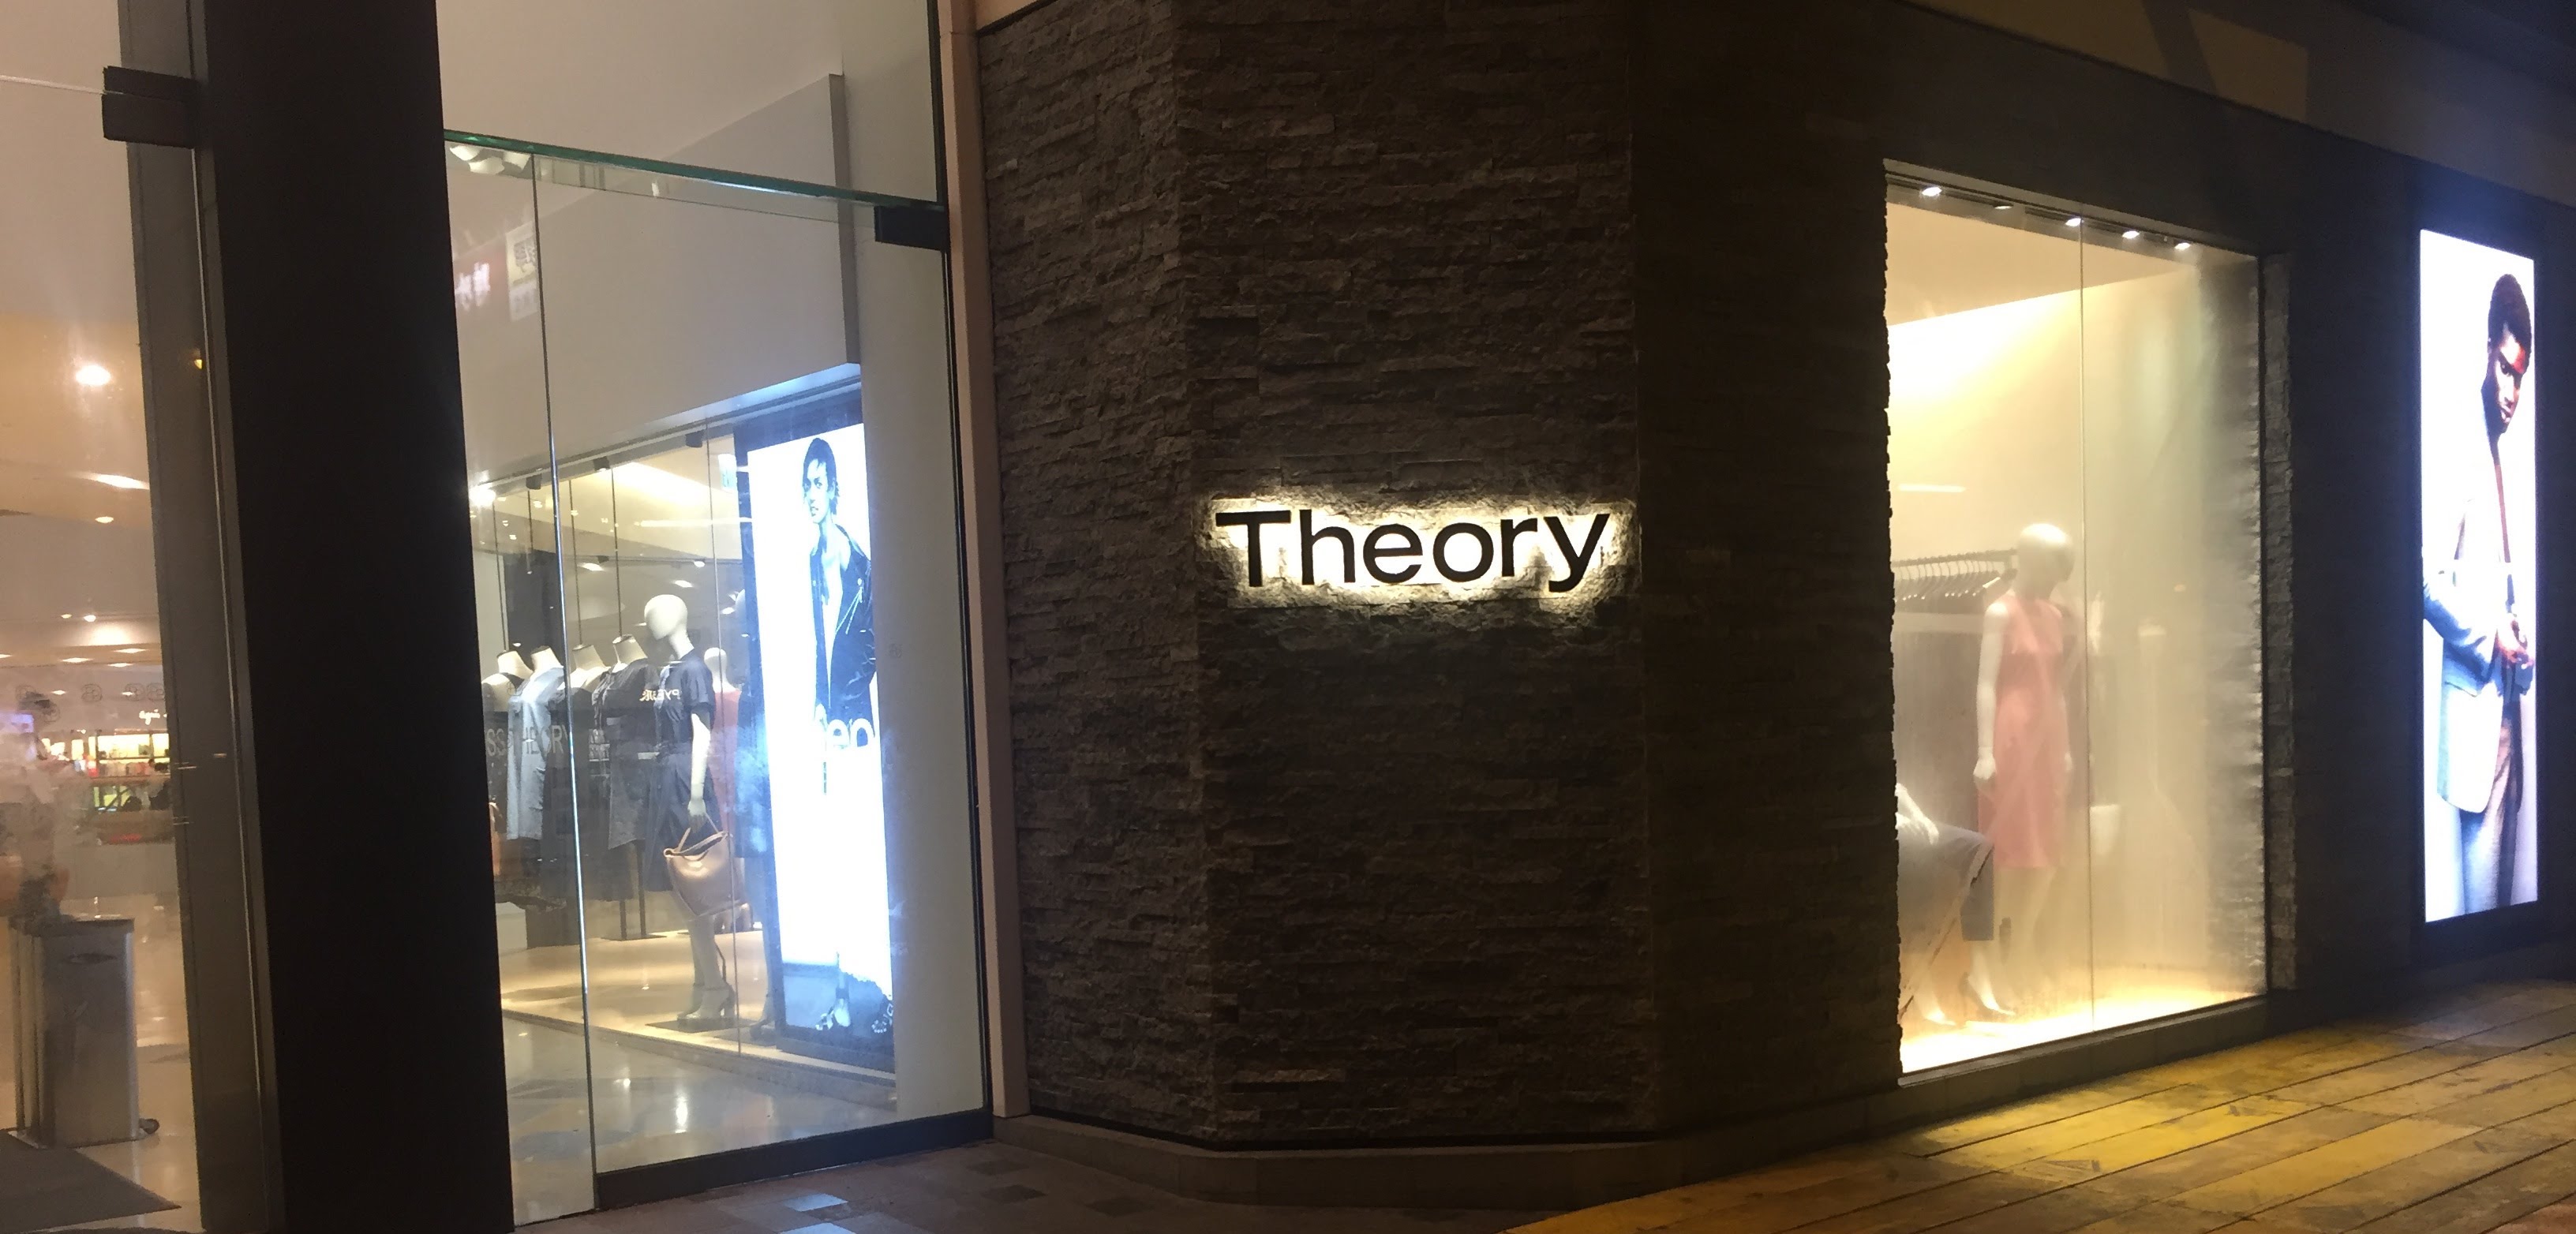 Picture of a retail clothing
      storefront with the word Theory on the wall. Picture is nighttime in Hong Kong
      with the store interior glowing through the windows and the Theory sign is backlit
      against the wall.